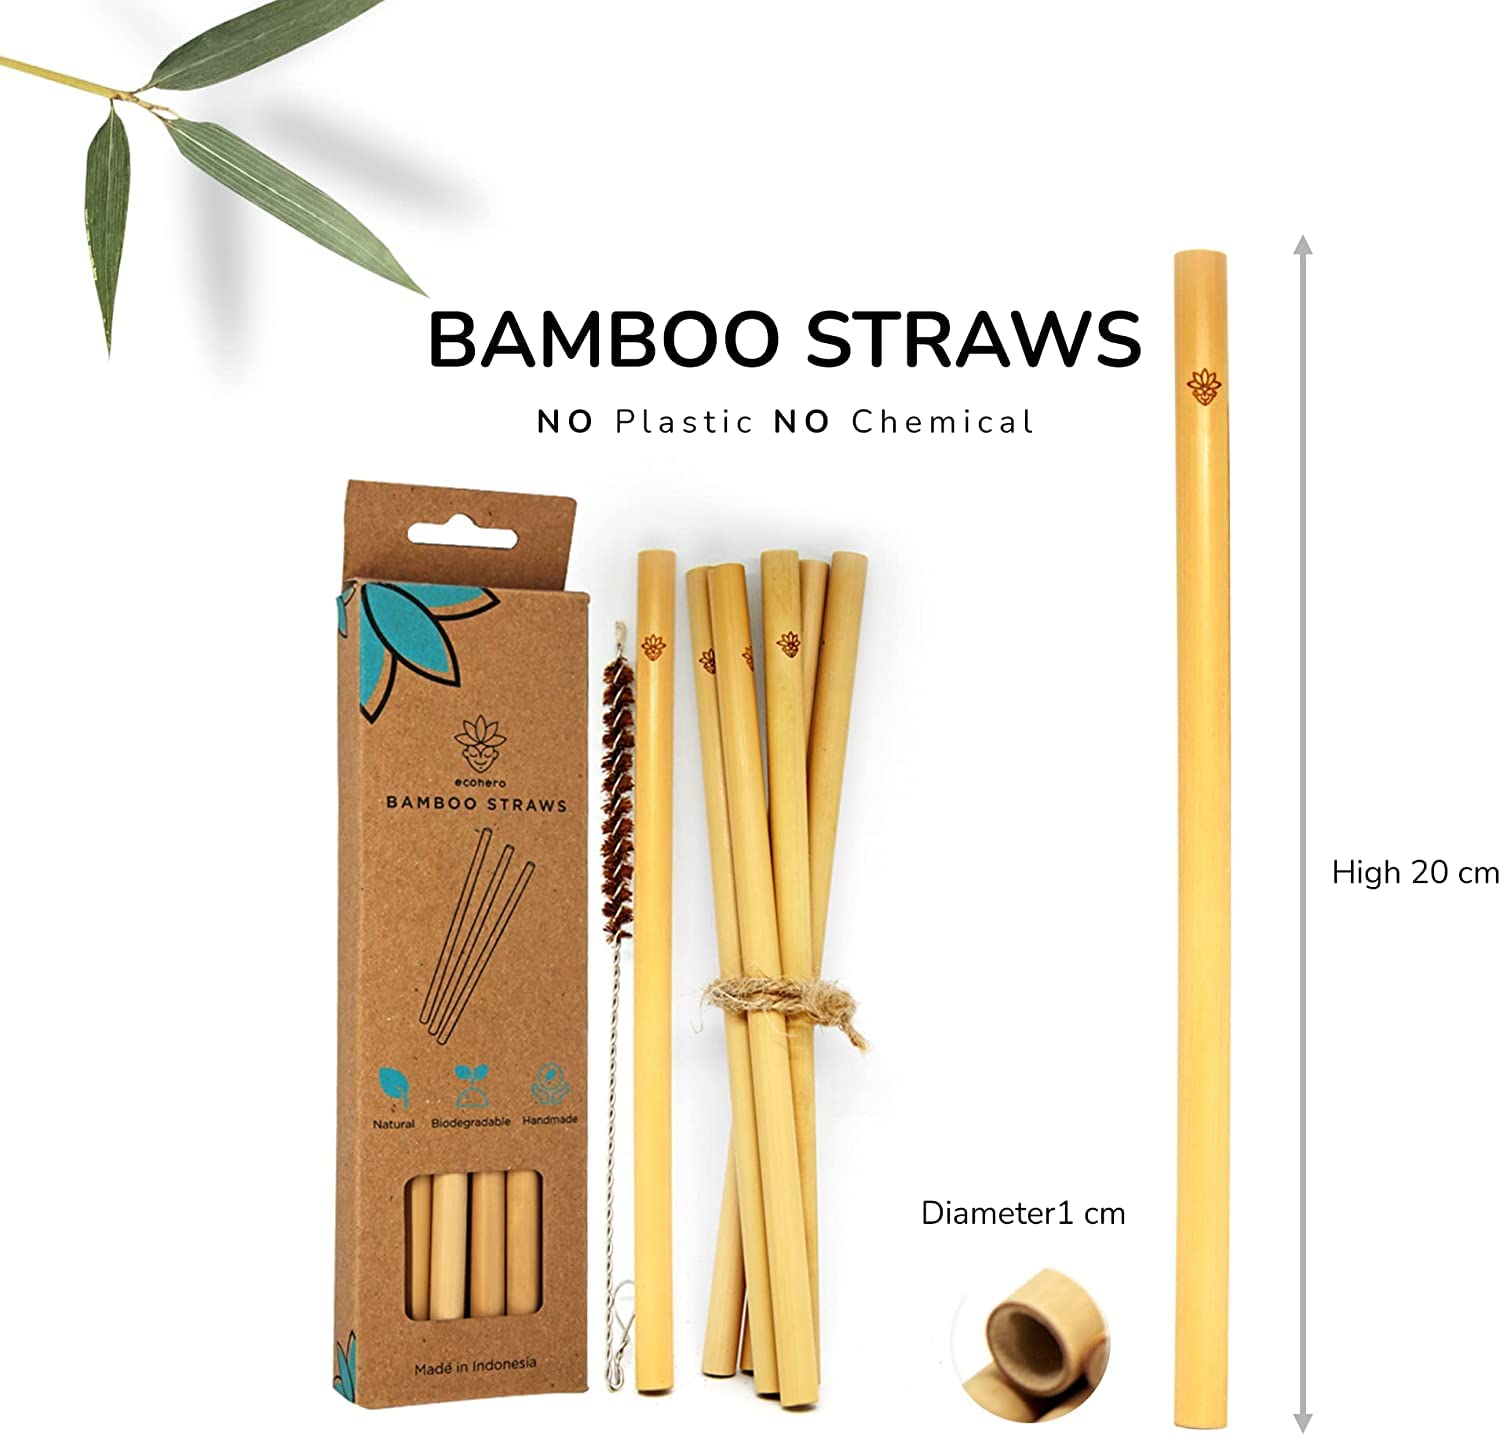 Reusable Bamboo Straws ECOHERO| Reusable Straw Cleaning brush, Handcrafted Bamboo Straw| Eco-Friendly Straws with Zero-Waste Packaging Biodegradable Straws Thick Organic Straws| 12 units large straws.